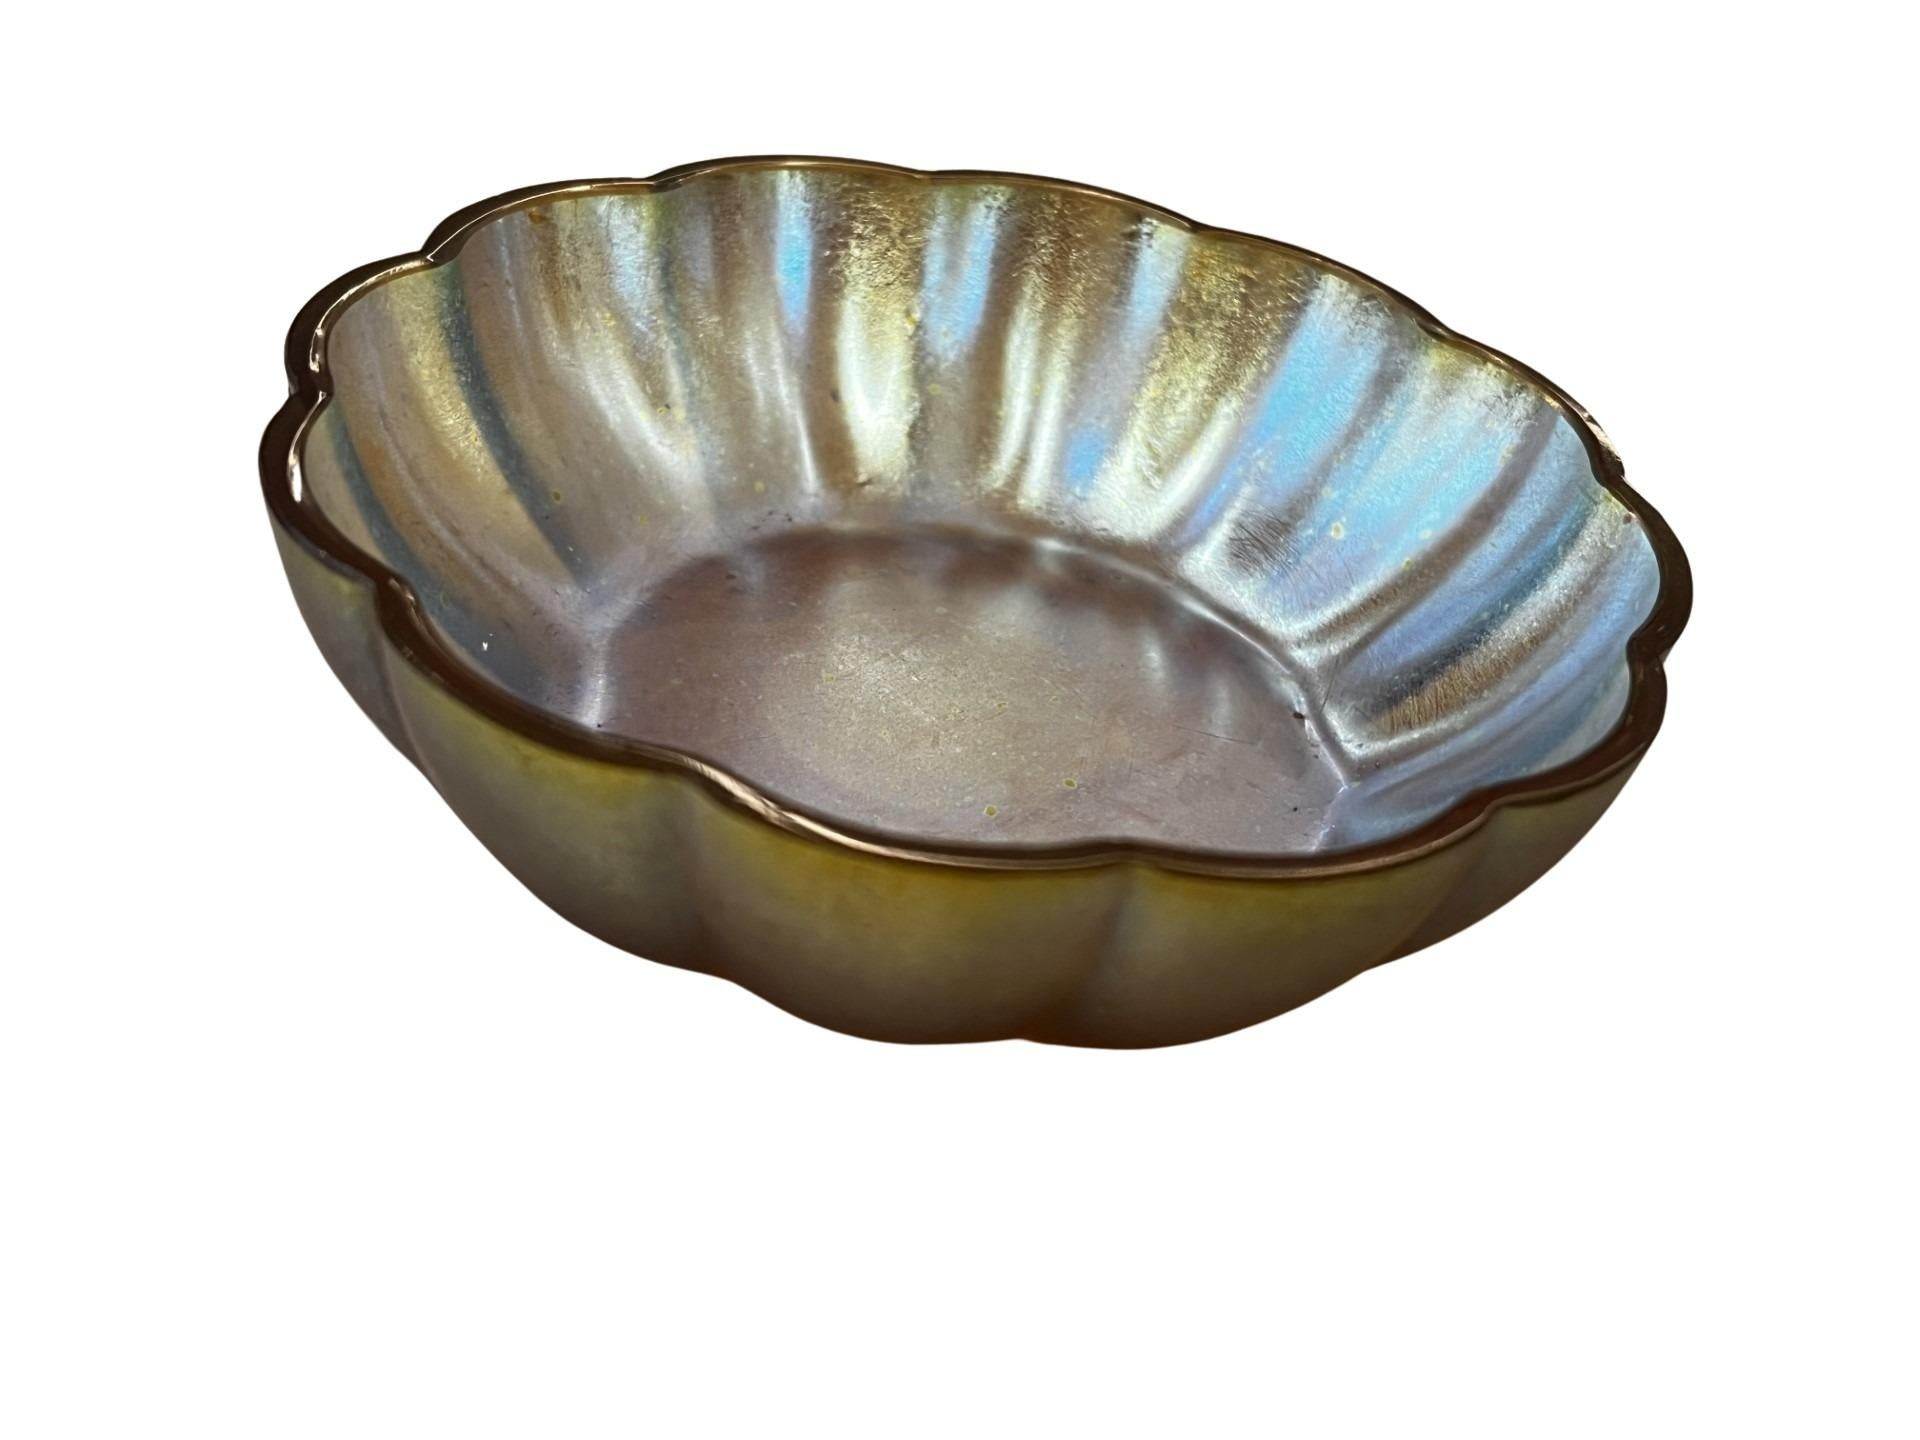 Beautiful iridescent bowl from the famous Württembergische Metallwarenfabrik in Germany, WMF, a very stunning piece from the Art Deco period. This object, called Myra Glas, was developed by WMF in the 1920s. 

The bowl has a round base and a flat